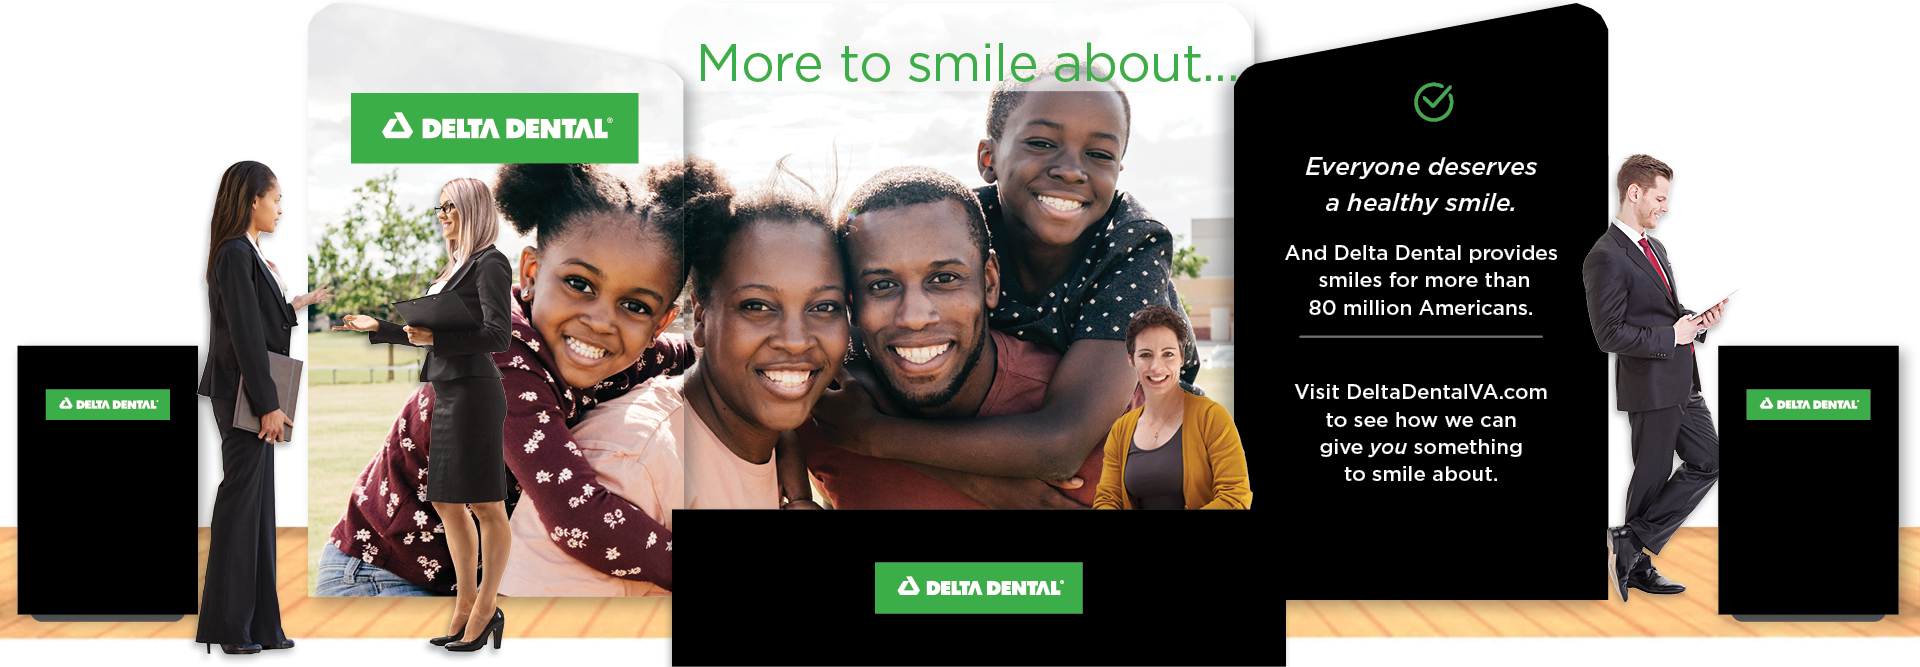 Image containing multiple people smiling along with the text "Everyone deserves a healthy smile" 